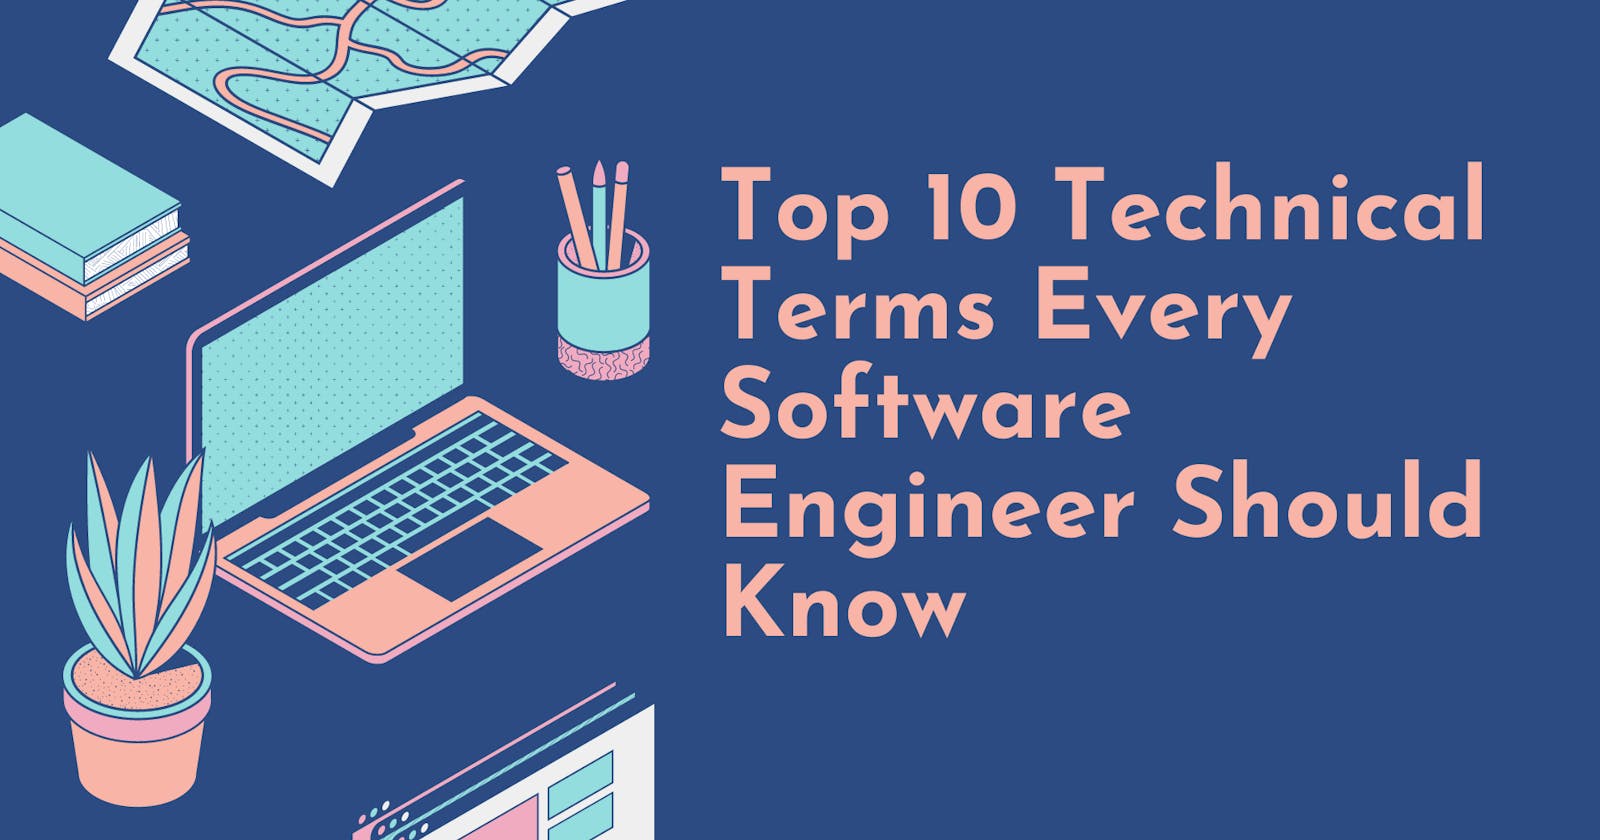 Top 10 Technical Terms Every Software Engineer Should Know